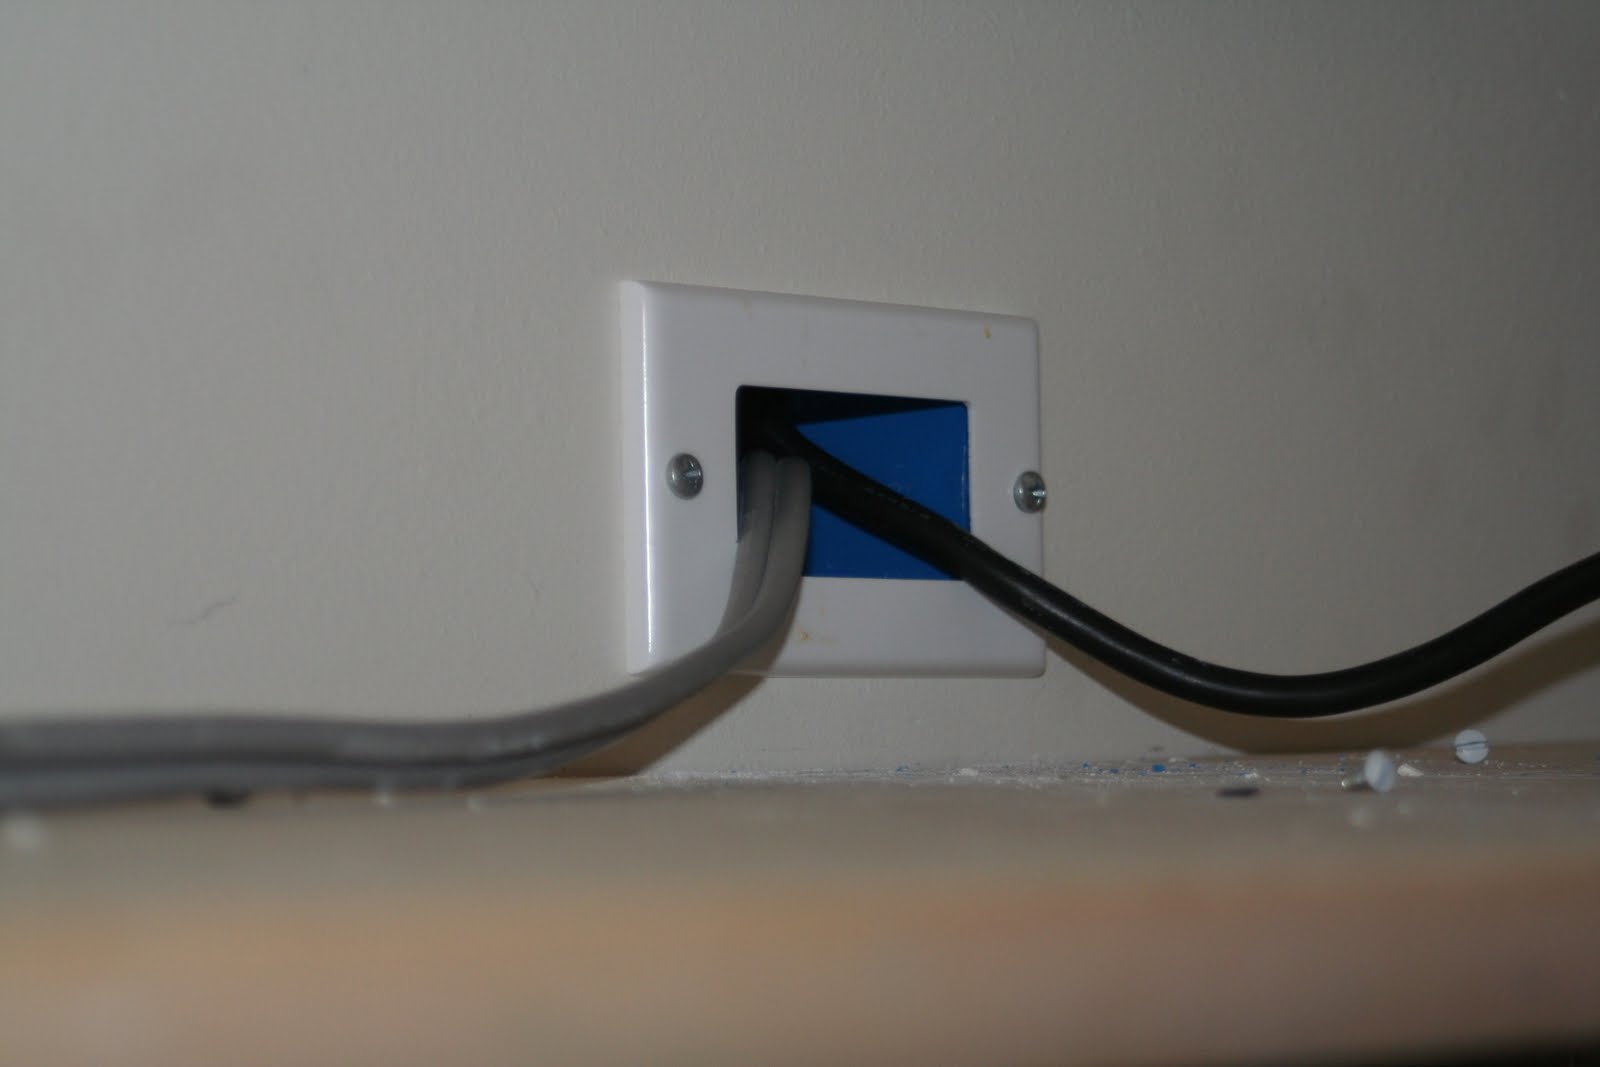 The TV mount and cable source at the bottom.